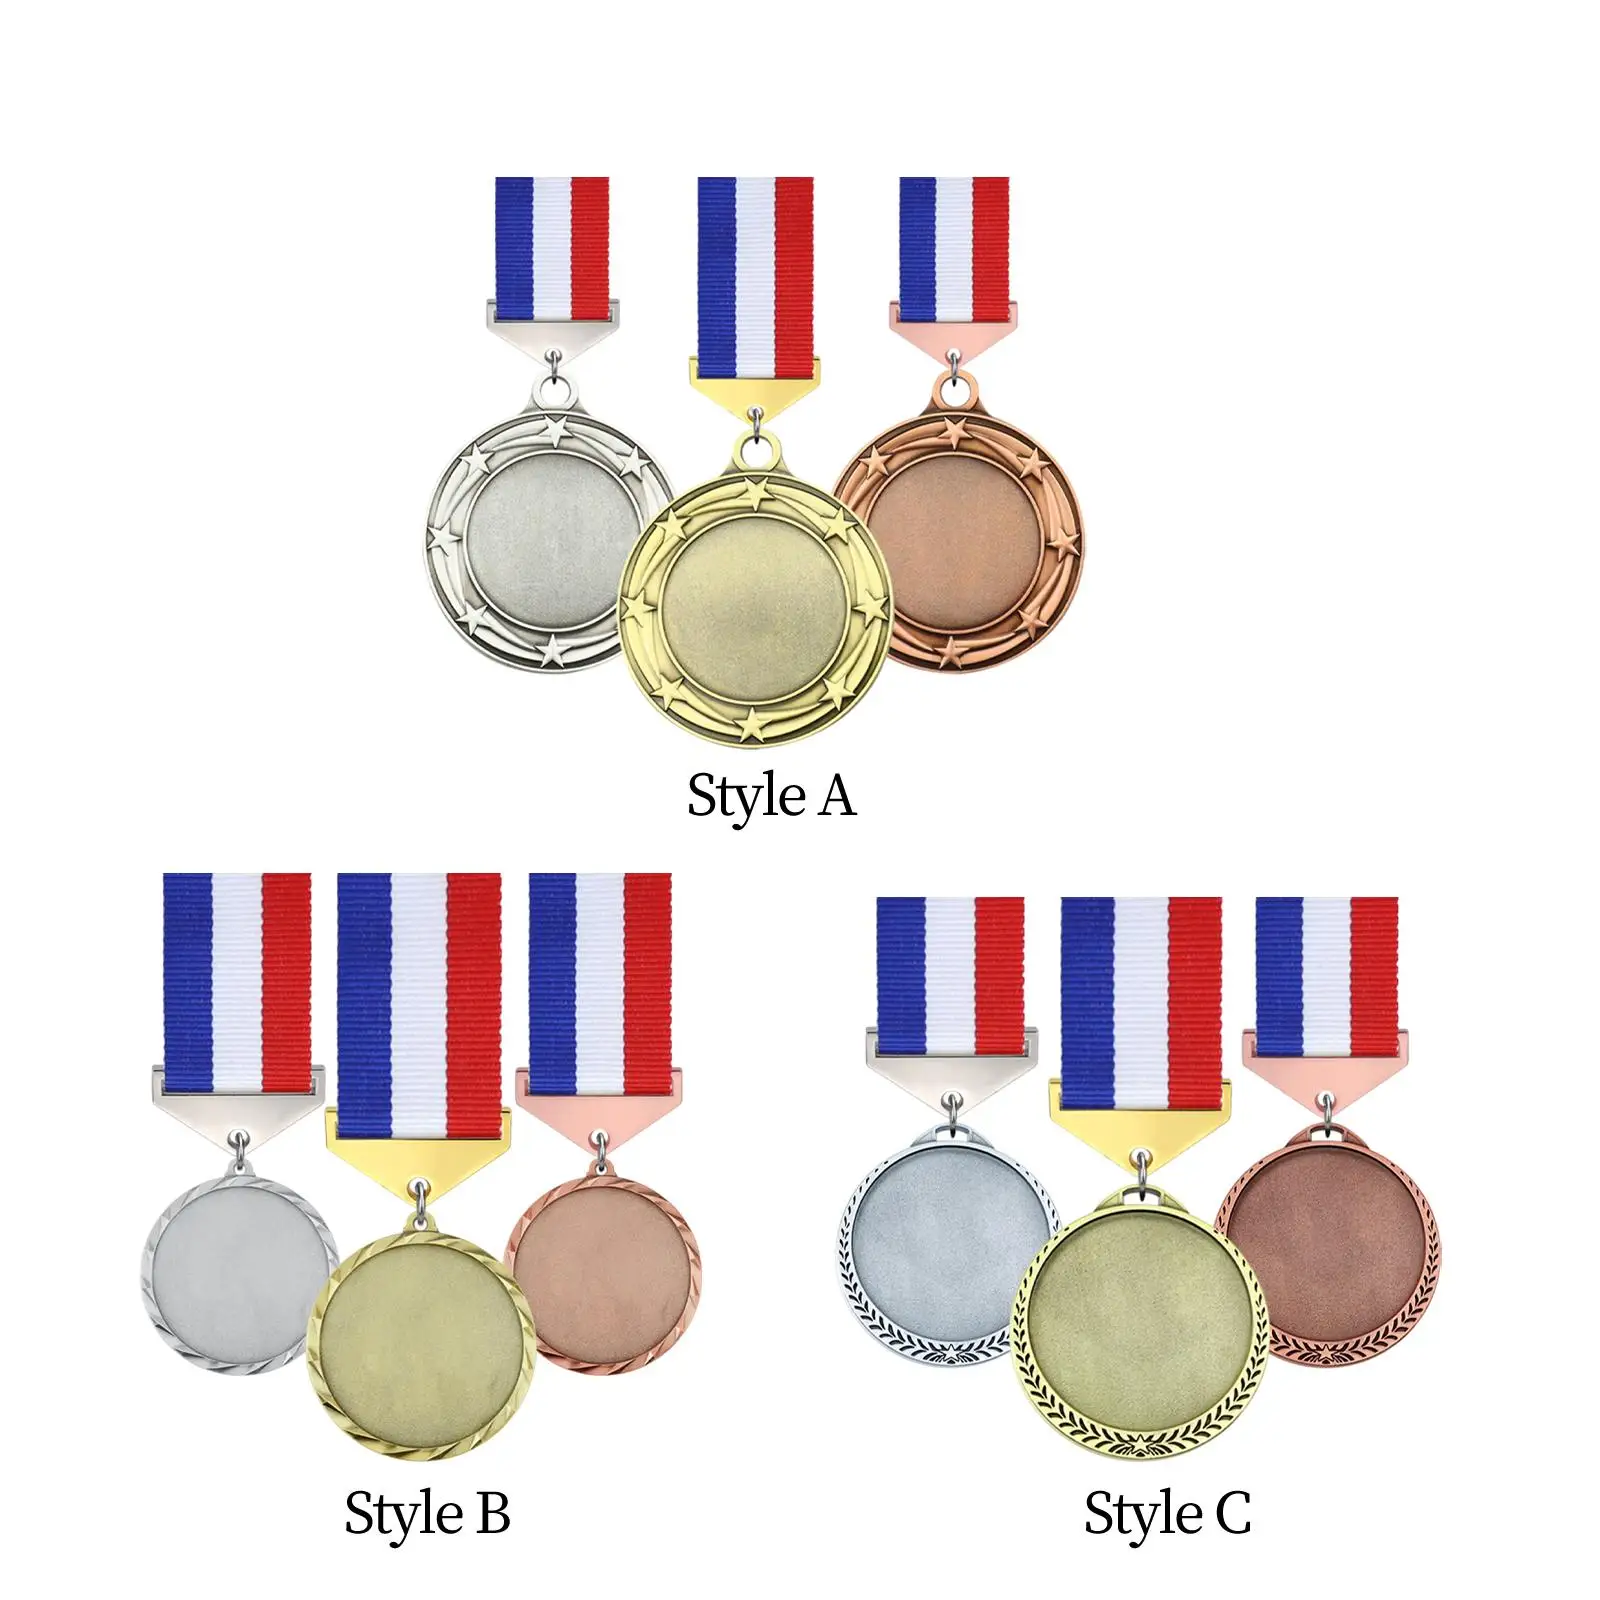 3 Pieces Metal Medals Zinc Alloy for Kids Adults Participation Awards with Ribbons for Games Events Party Soccer Baseball